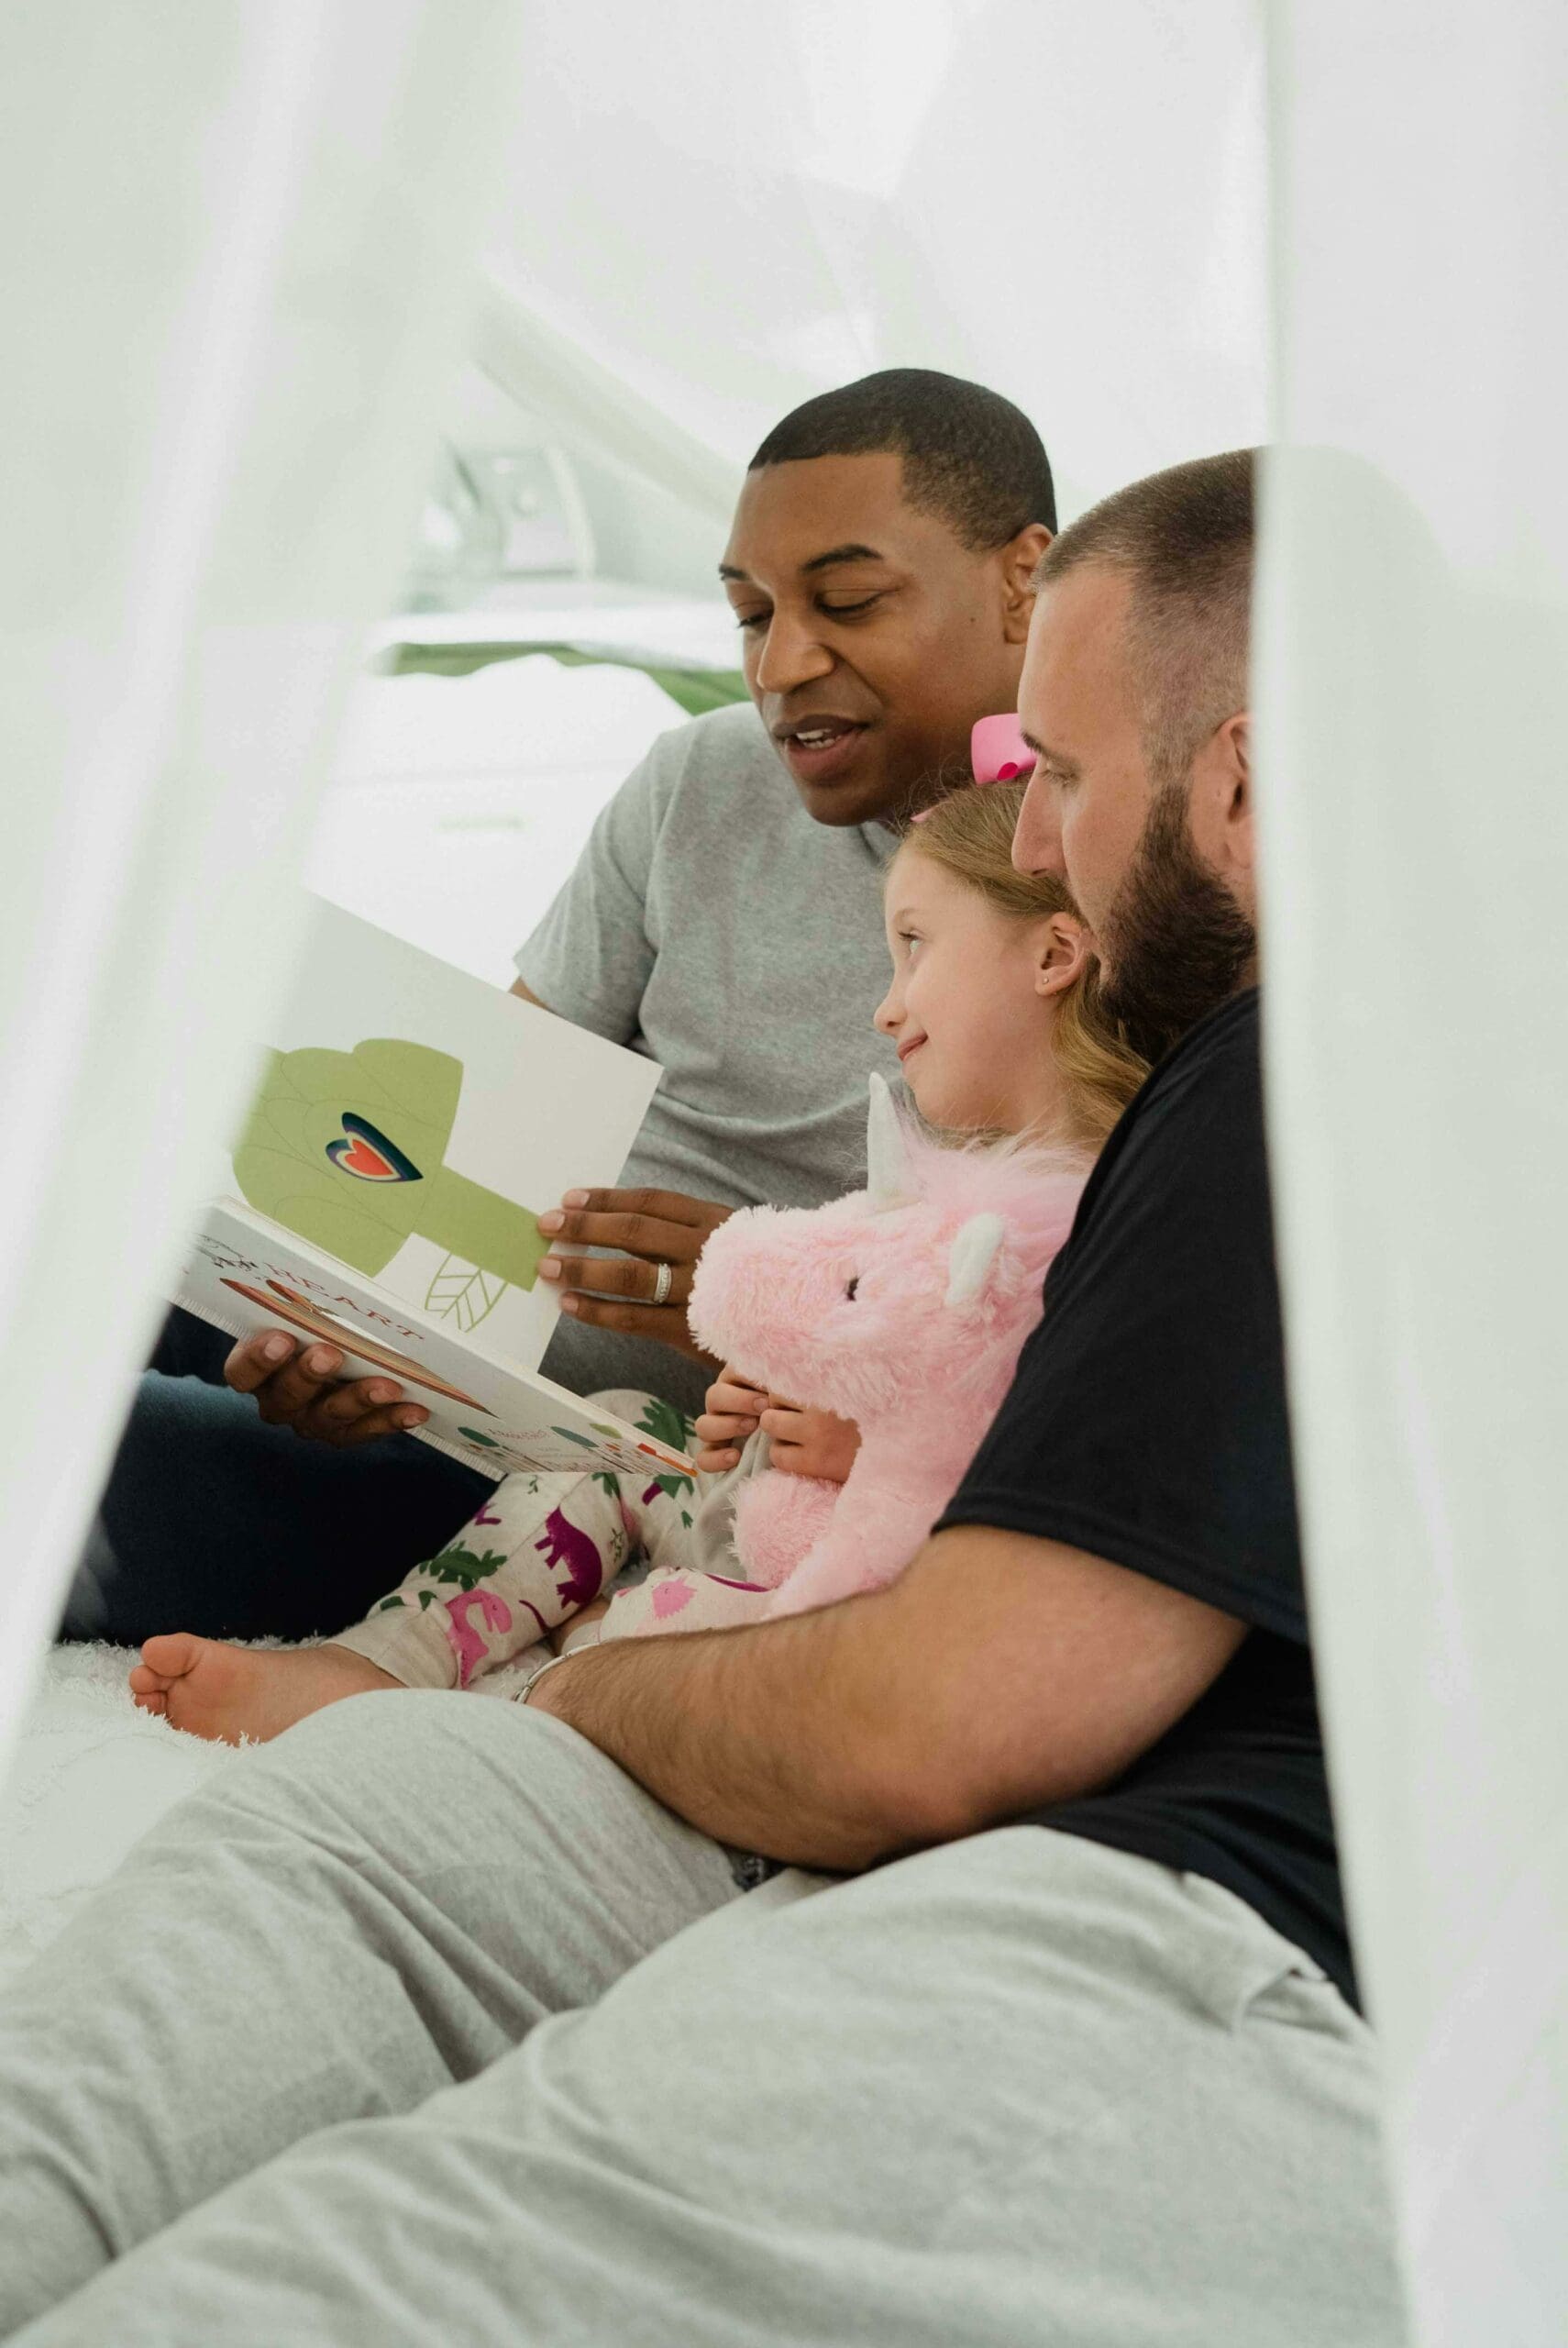 A joyful moment inside a cozy blanket fort with two men and a young child reading a book together, illustrating the nurturing environment created through the adoption process in Australia.